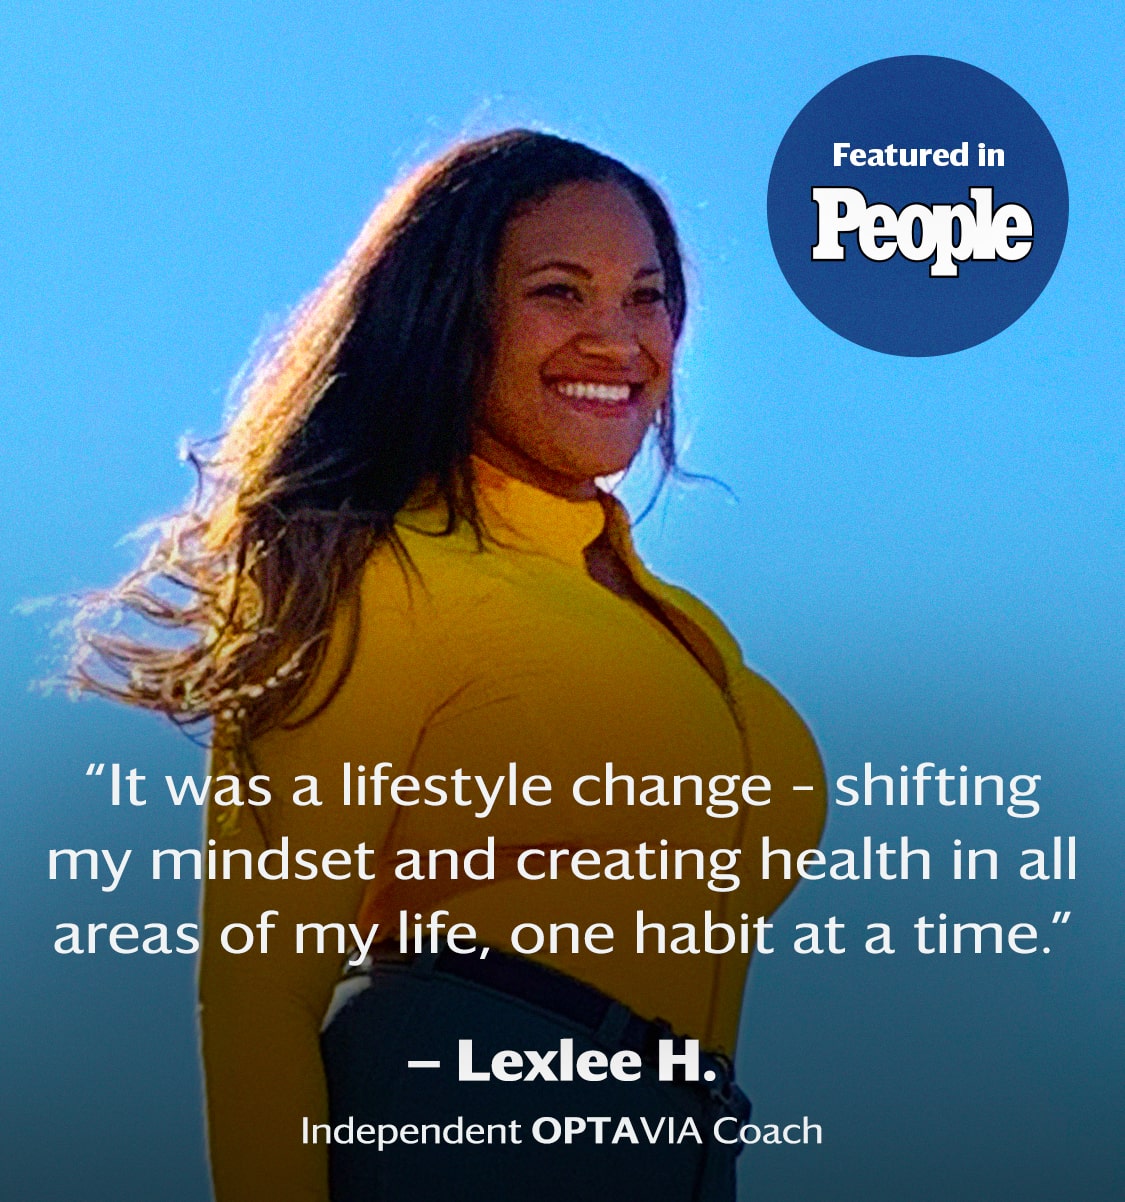 Featured in People: It was a lifestyle change, shifiting my mindset and creating health in all areas of my life, one healthy habit at a time. Lexlee H., Independent OPTAVIA Coach.